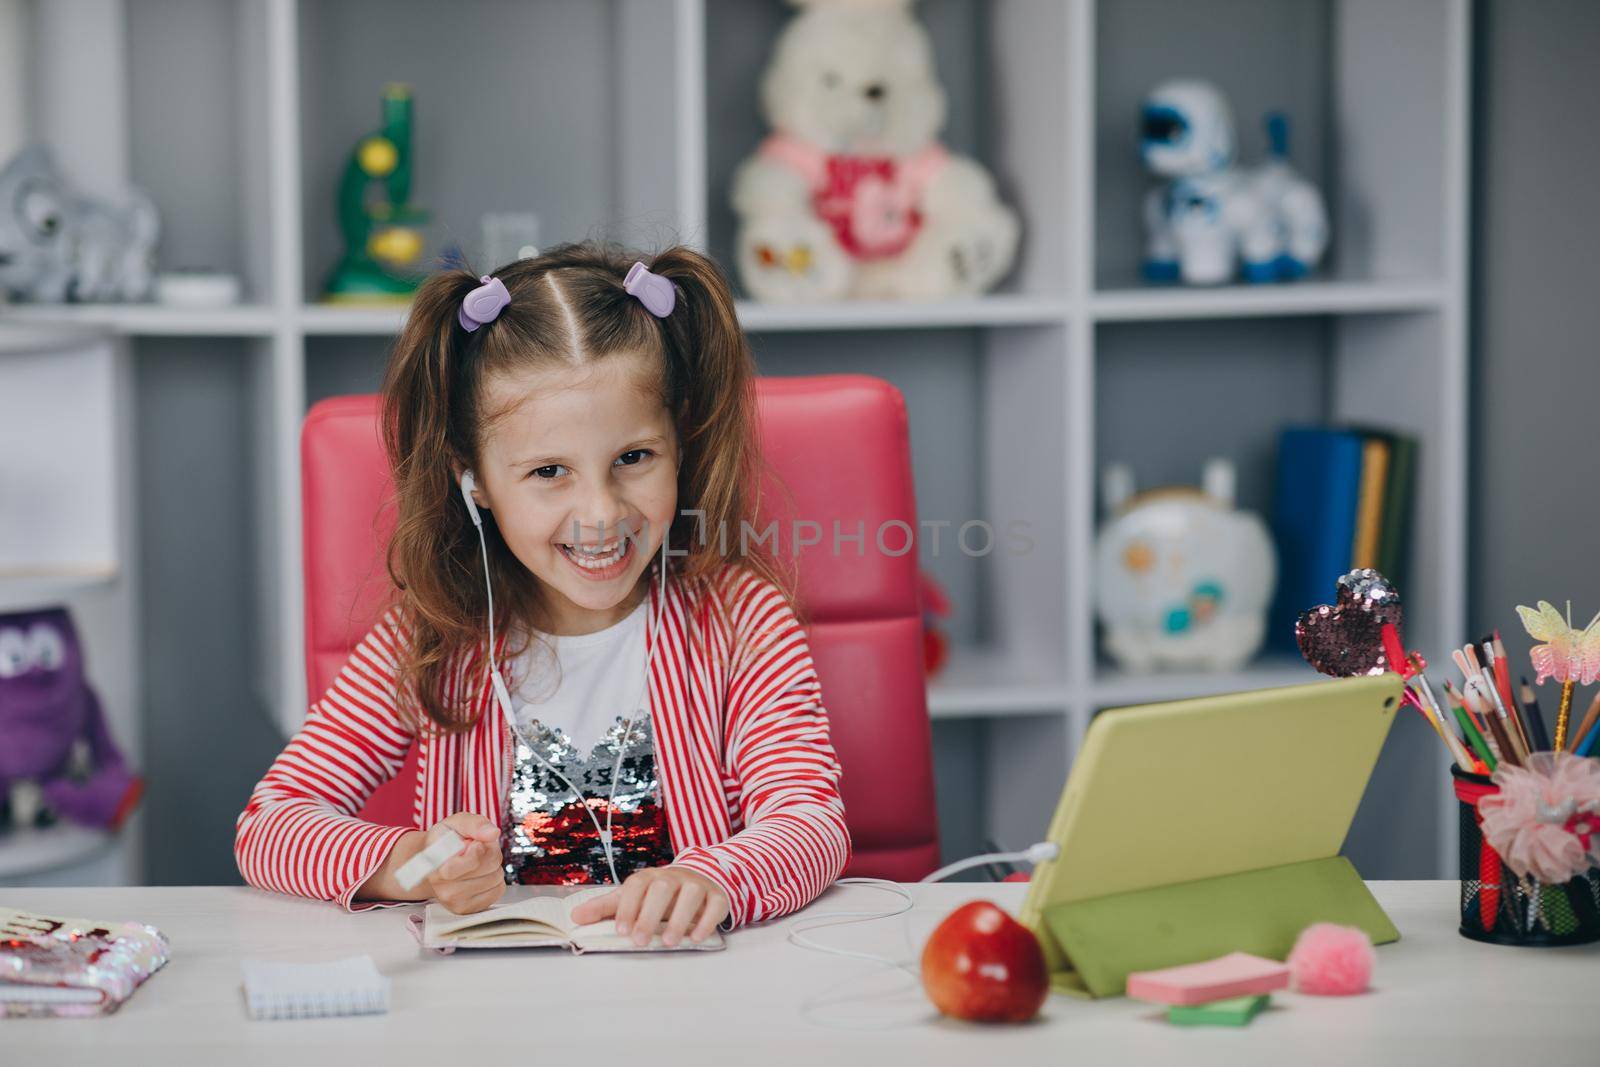 Distance learning, school online. Portrait of a preschool girl looking at the book and smiling. Self isolation and online schooling. by uflypro